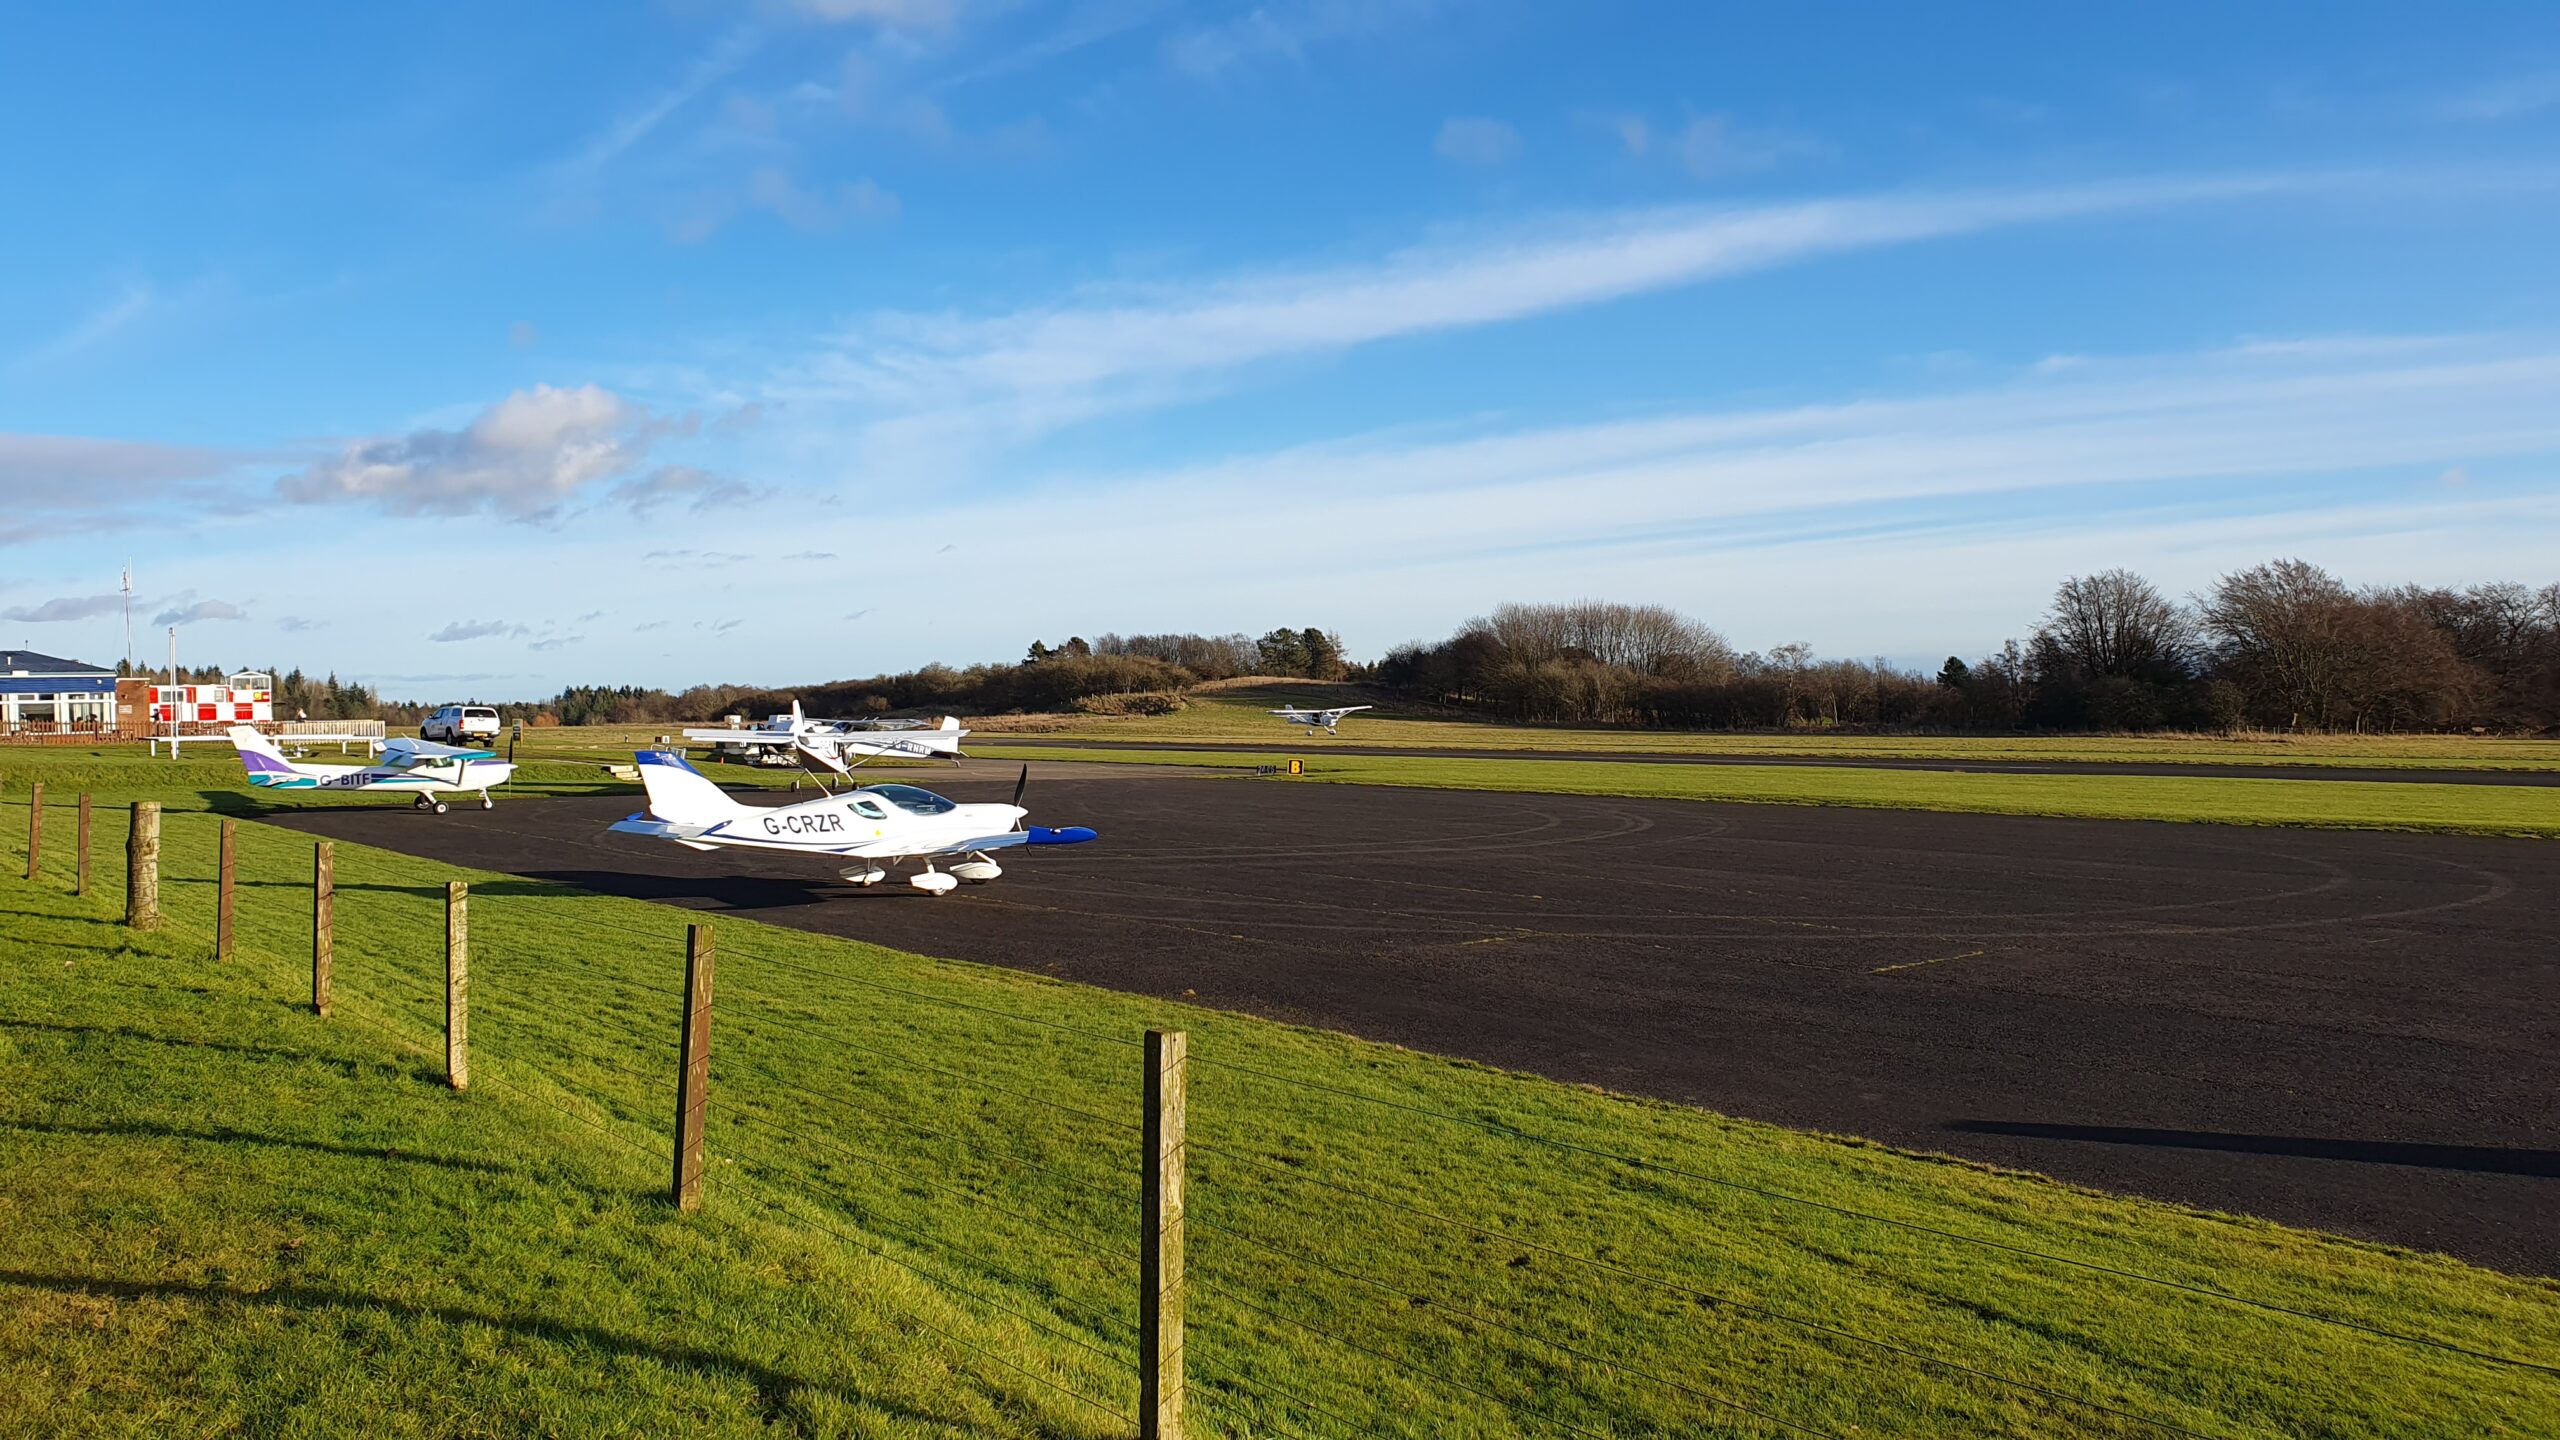 Glenrothes Airport: A Regional Hub for Business and Leisure Travel